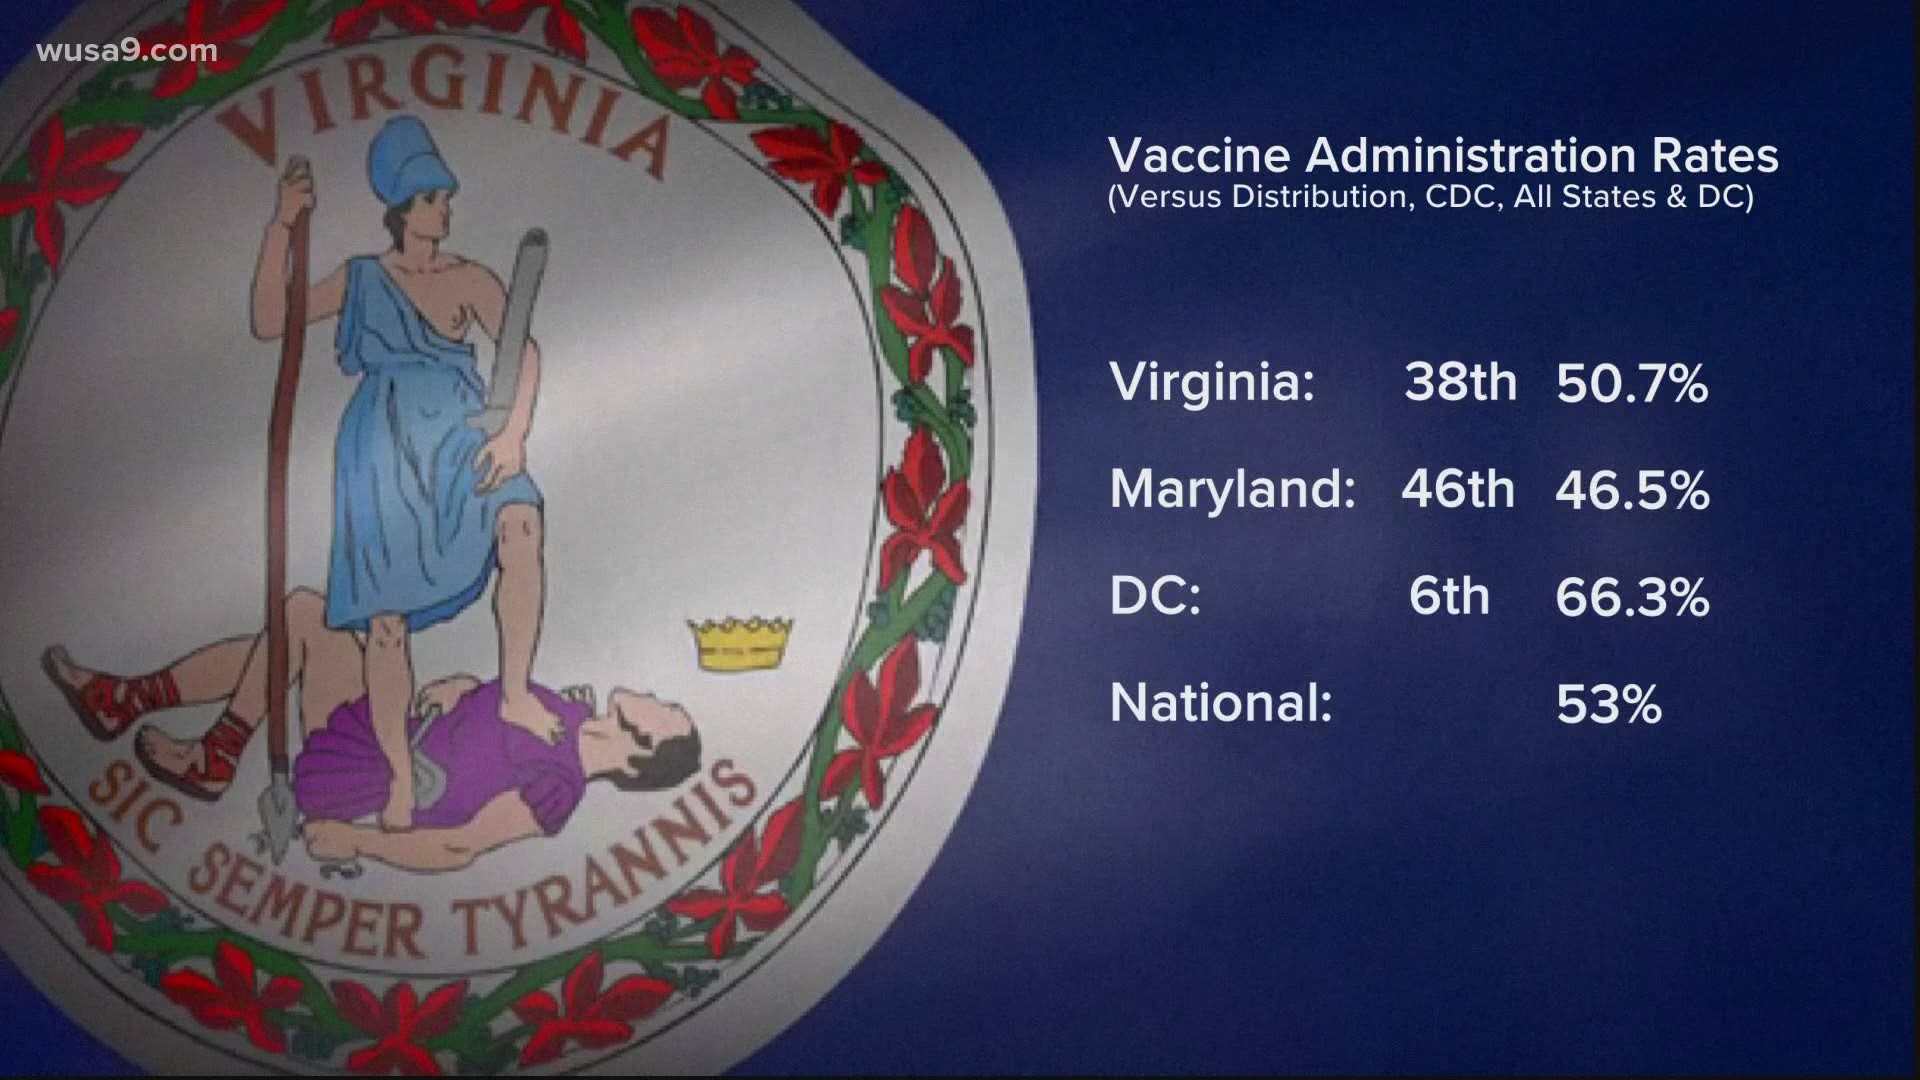 According to the CDC, both Virginia and Maryland rank in the bottom half of states when it comes to the rate at which they are vaccinating locals.